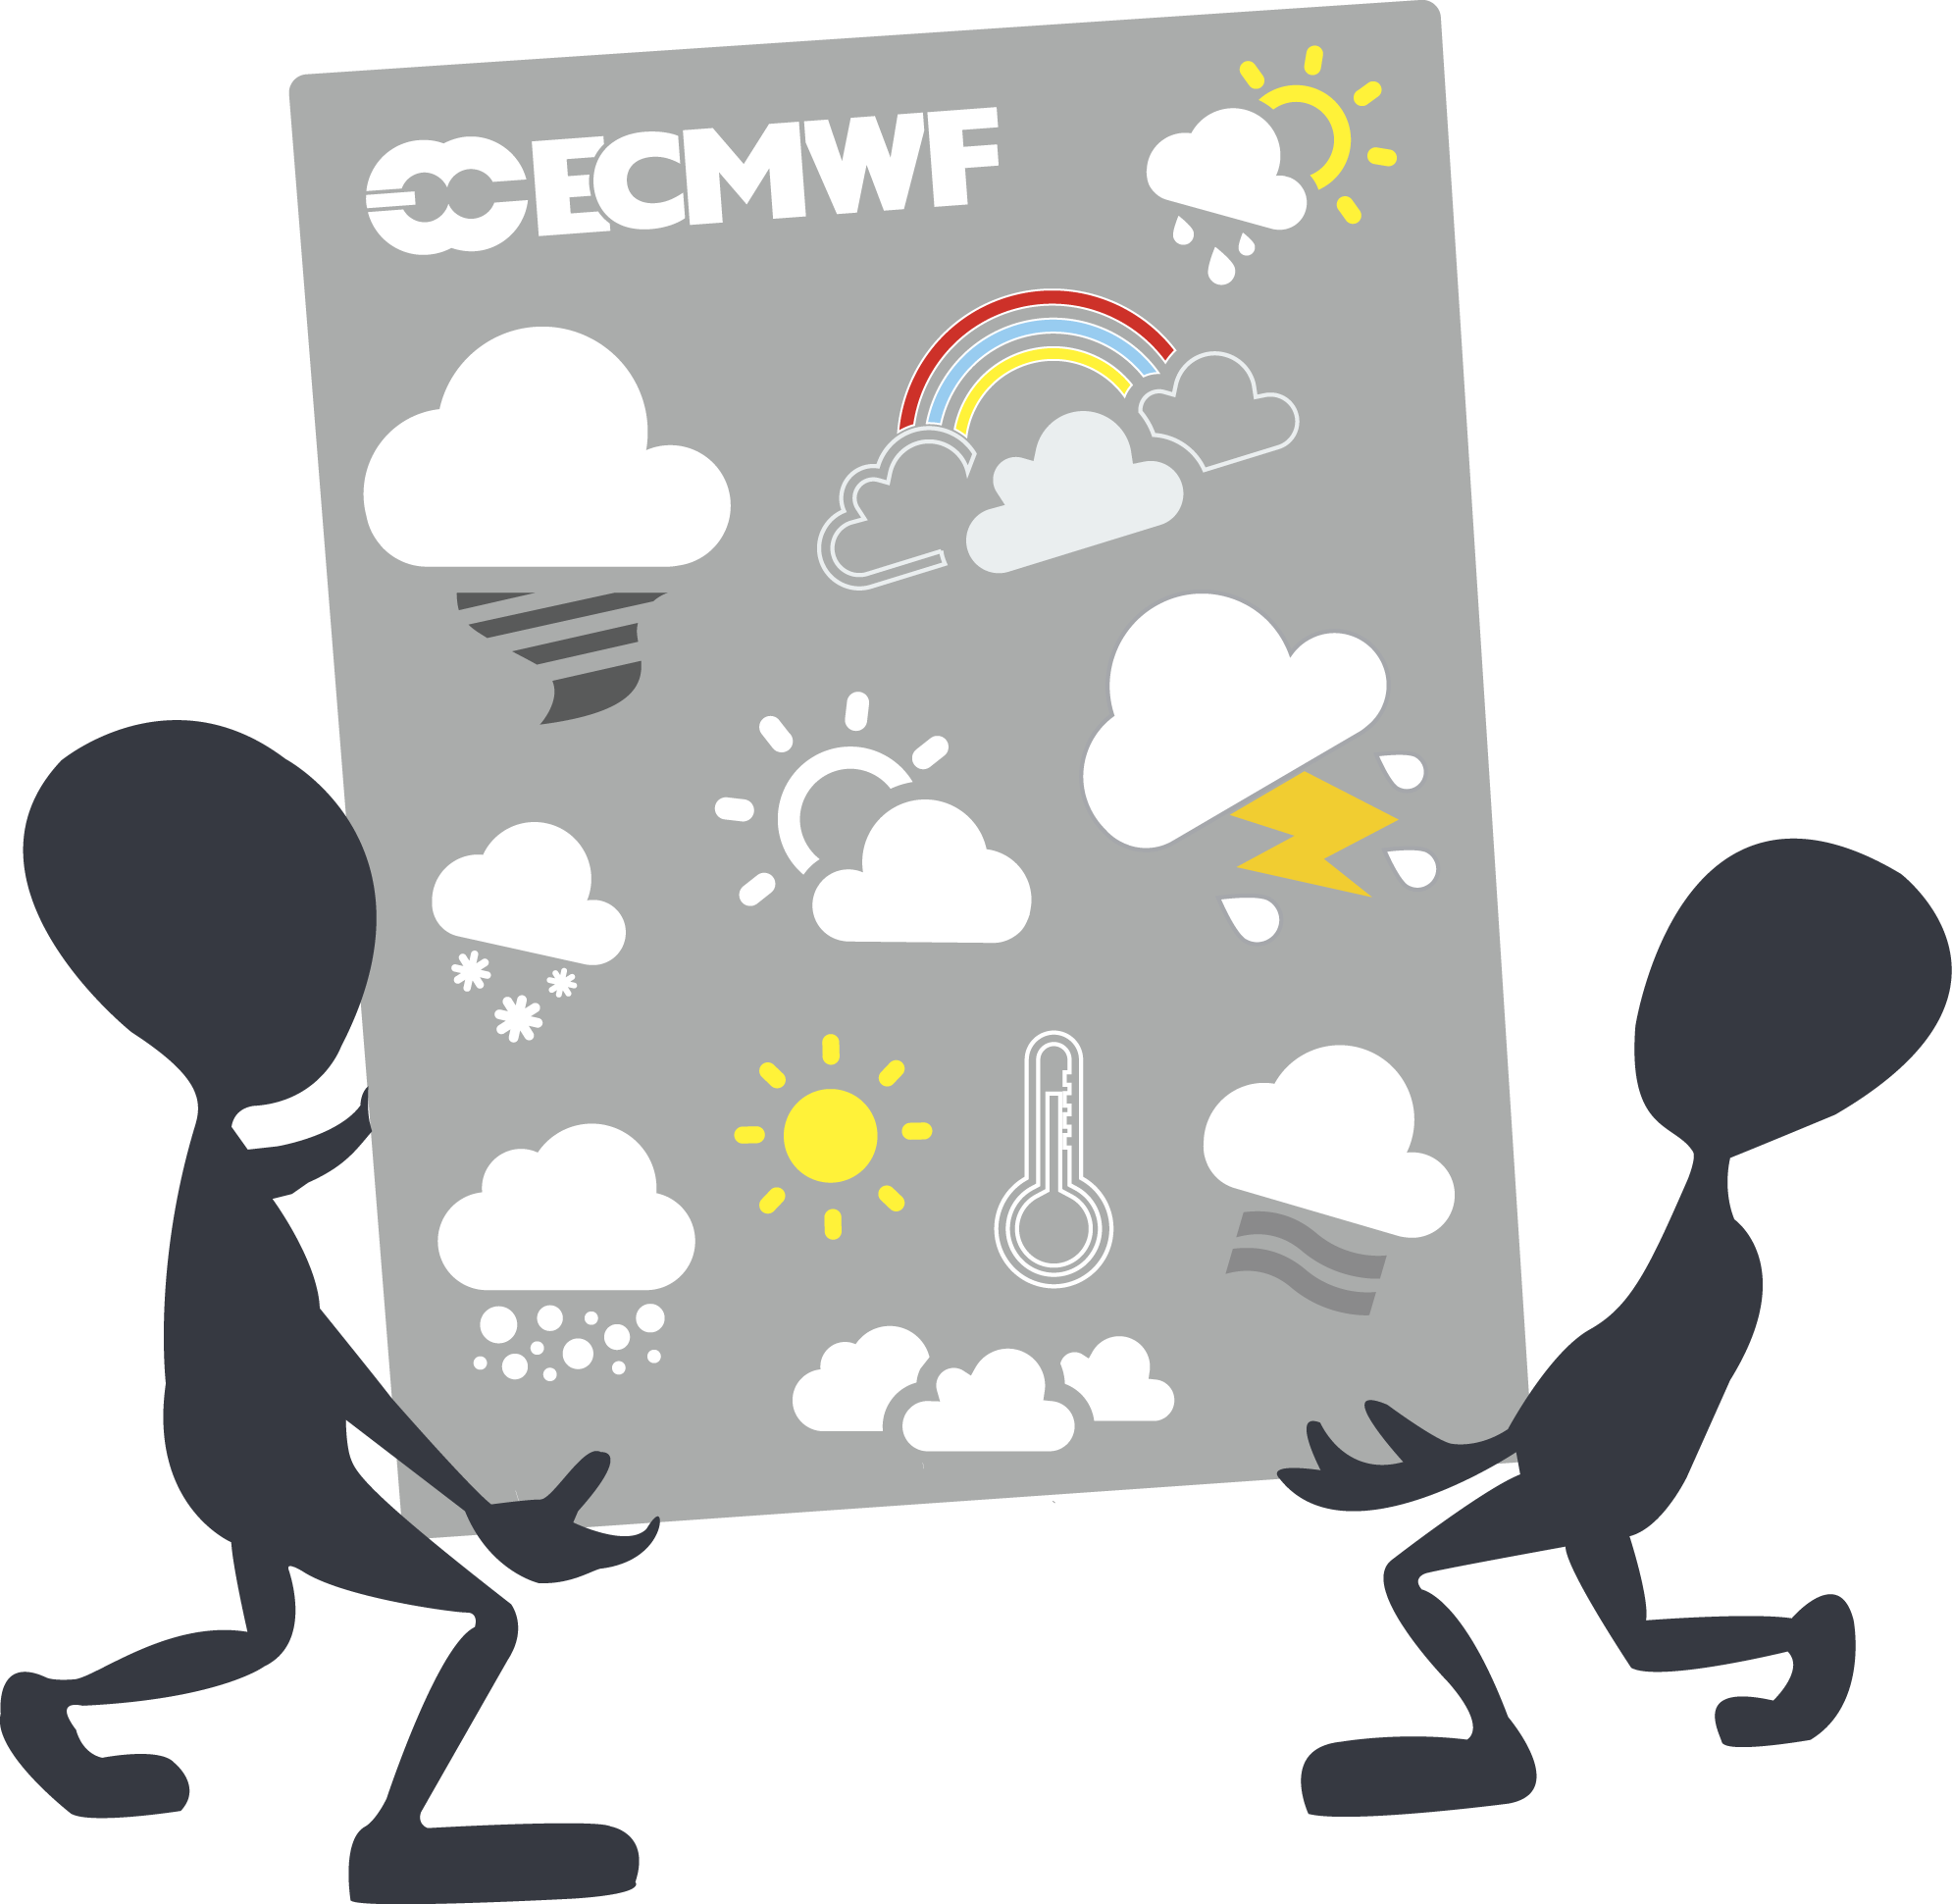 Two people carrying an ECMWF placard